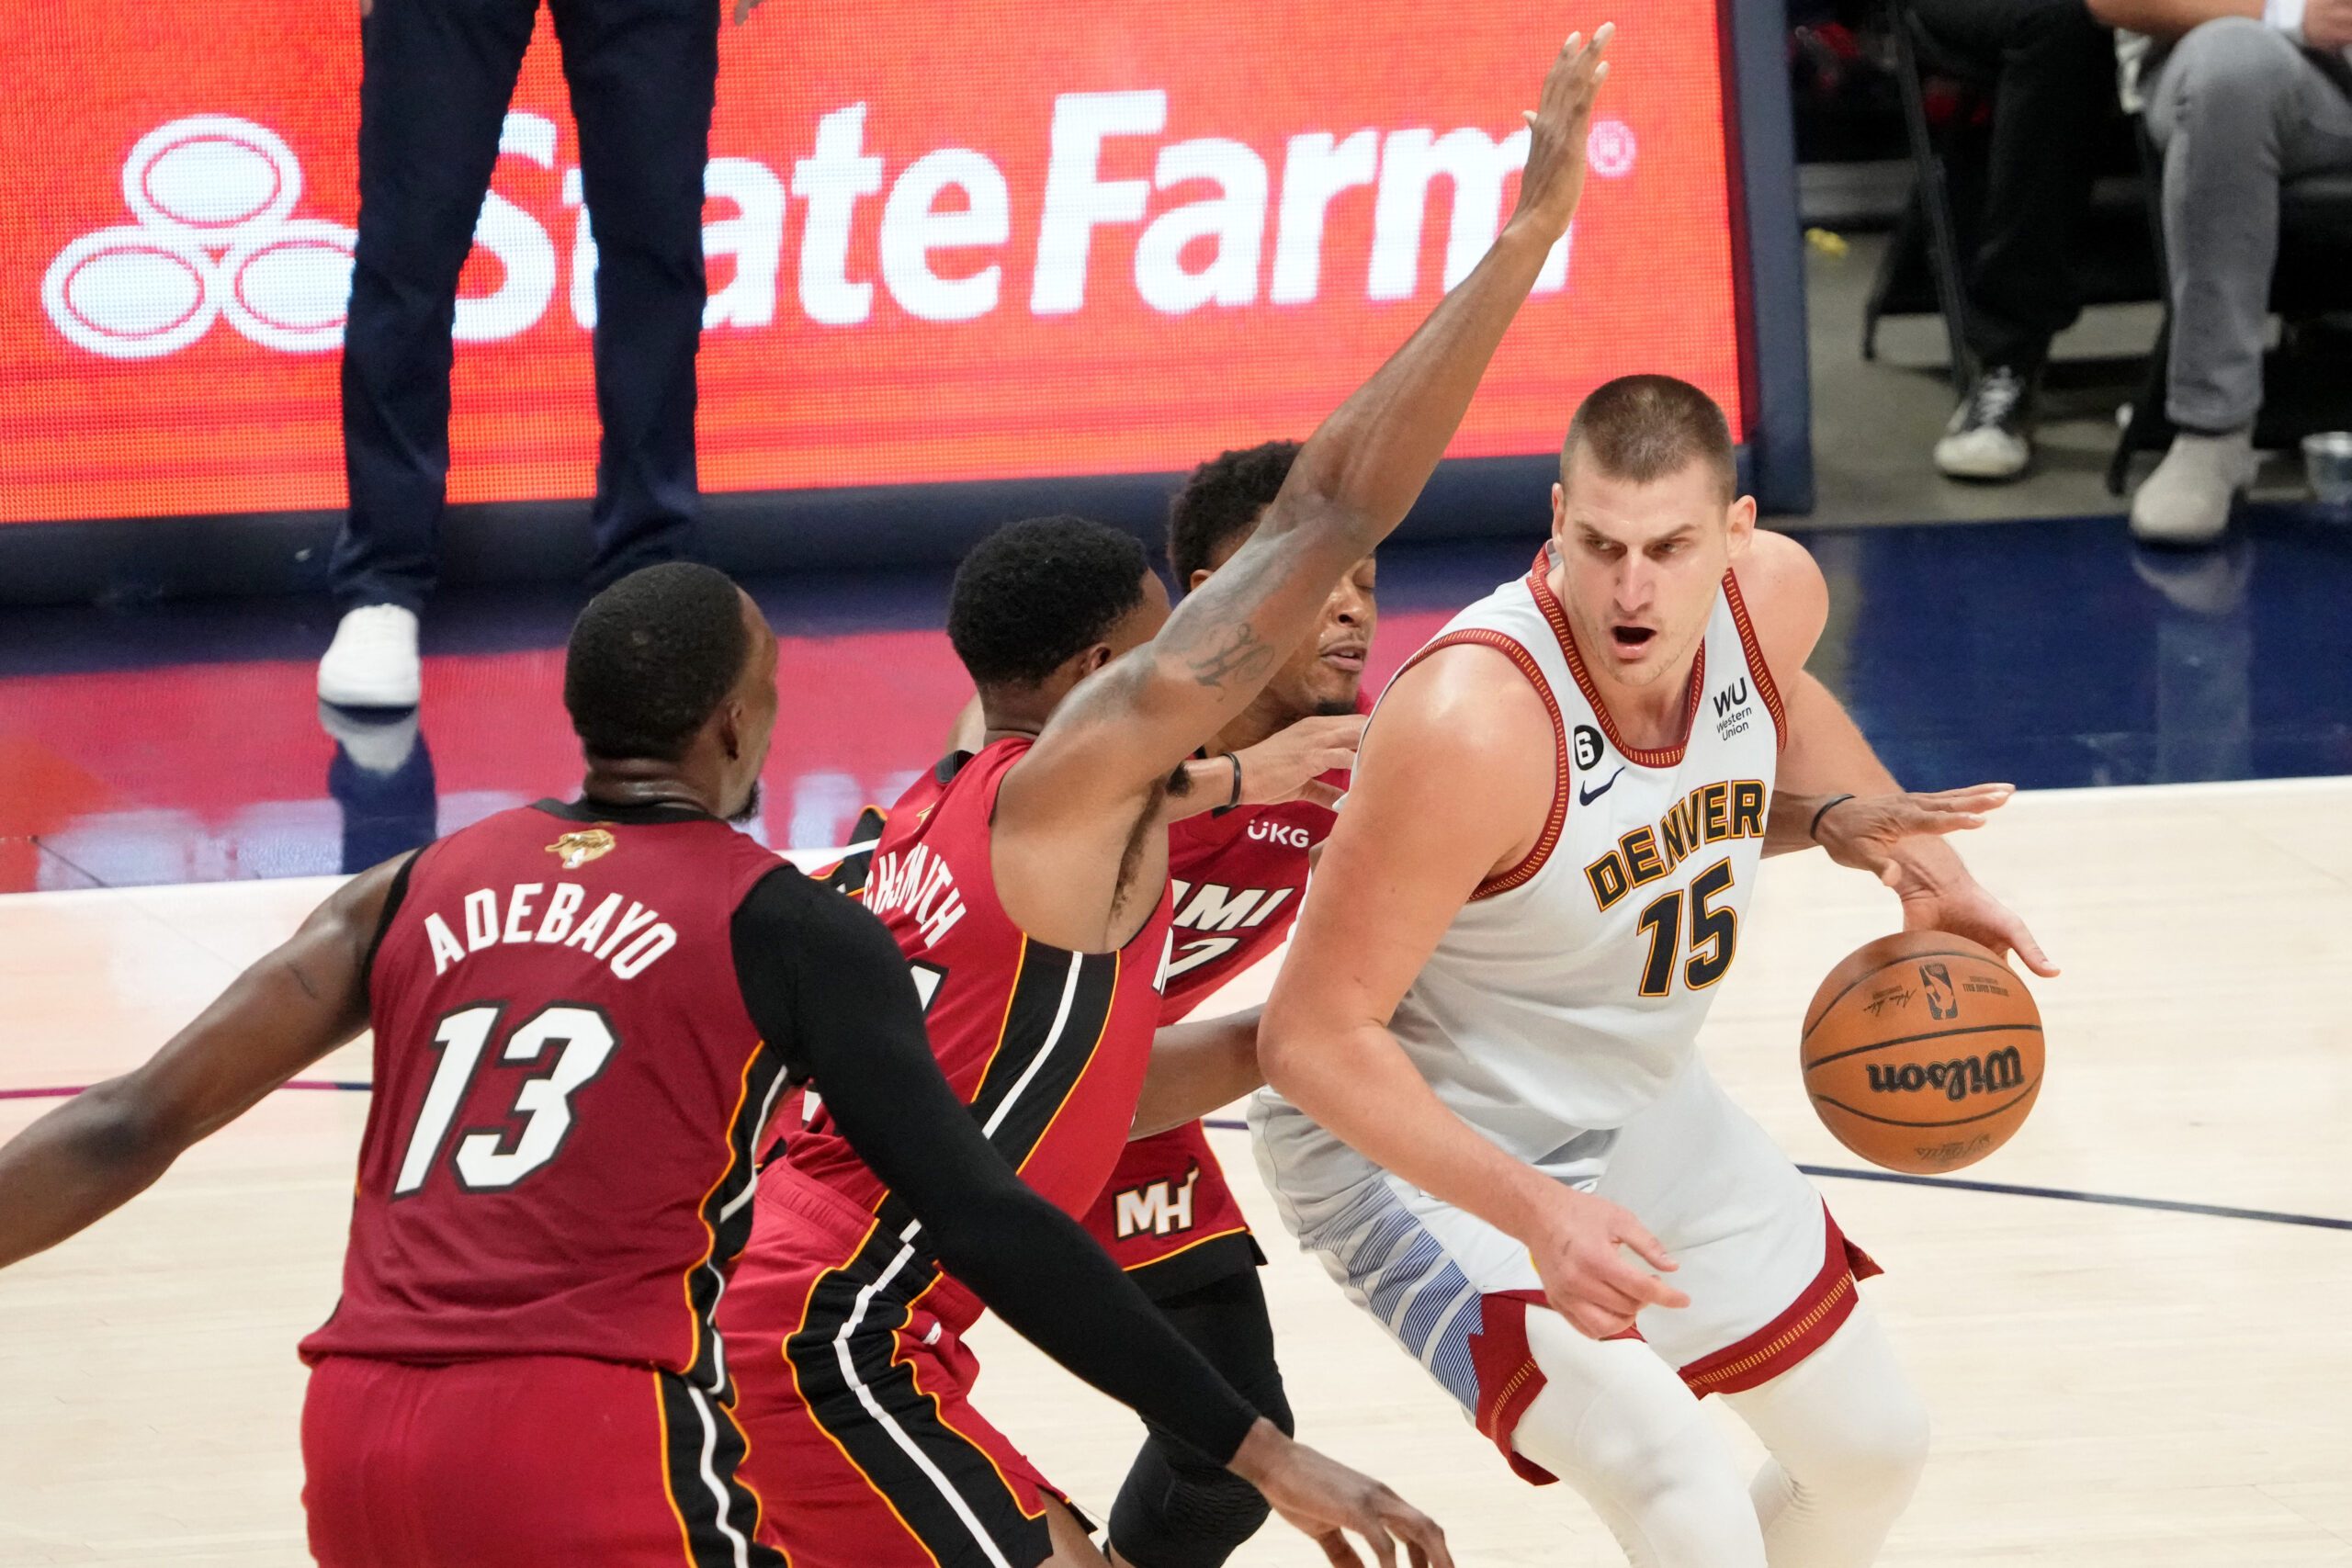 Jokic-led Nuggets oust Heat in Game 5 thriller, win 1st title in 47-year history